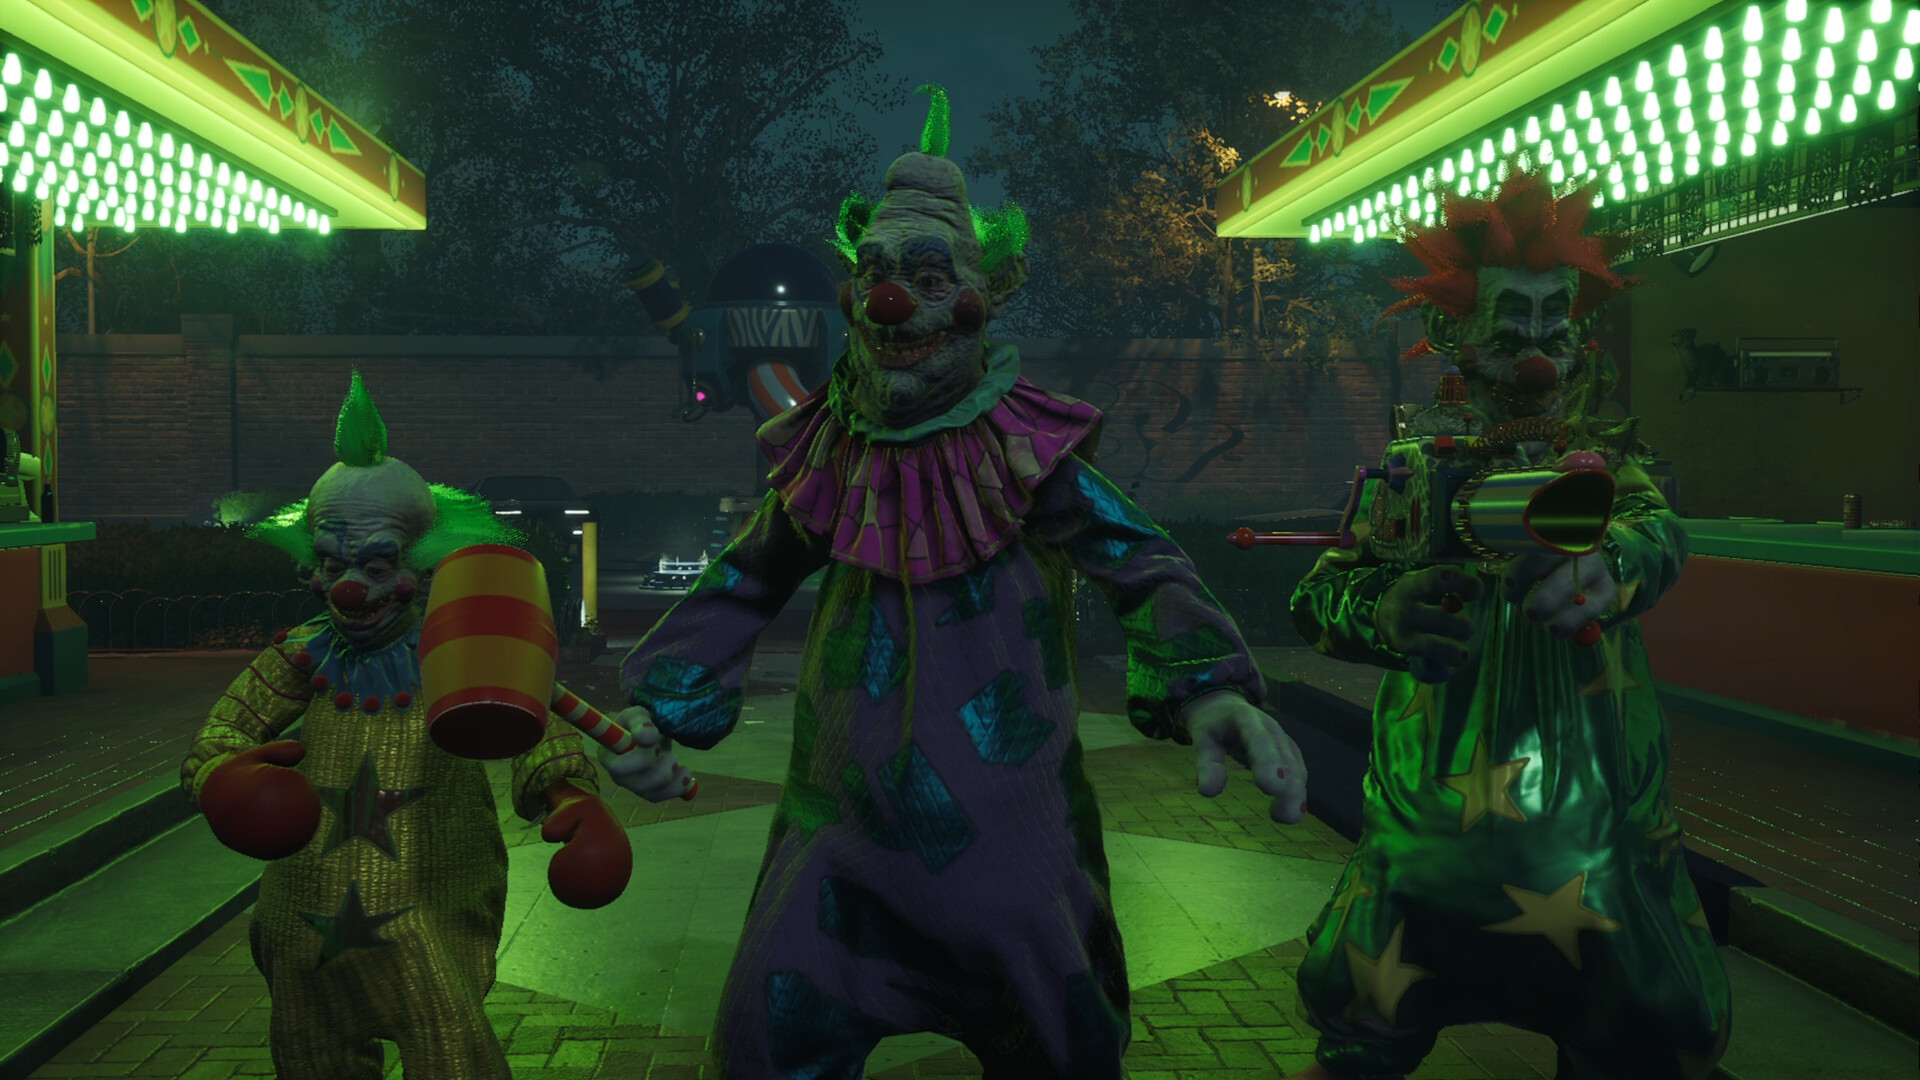 Killer Klowns from Outer Space: The Horror Has Arrived